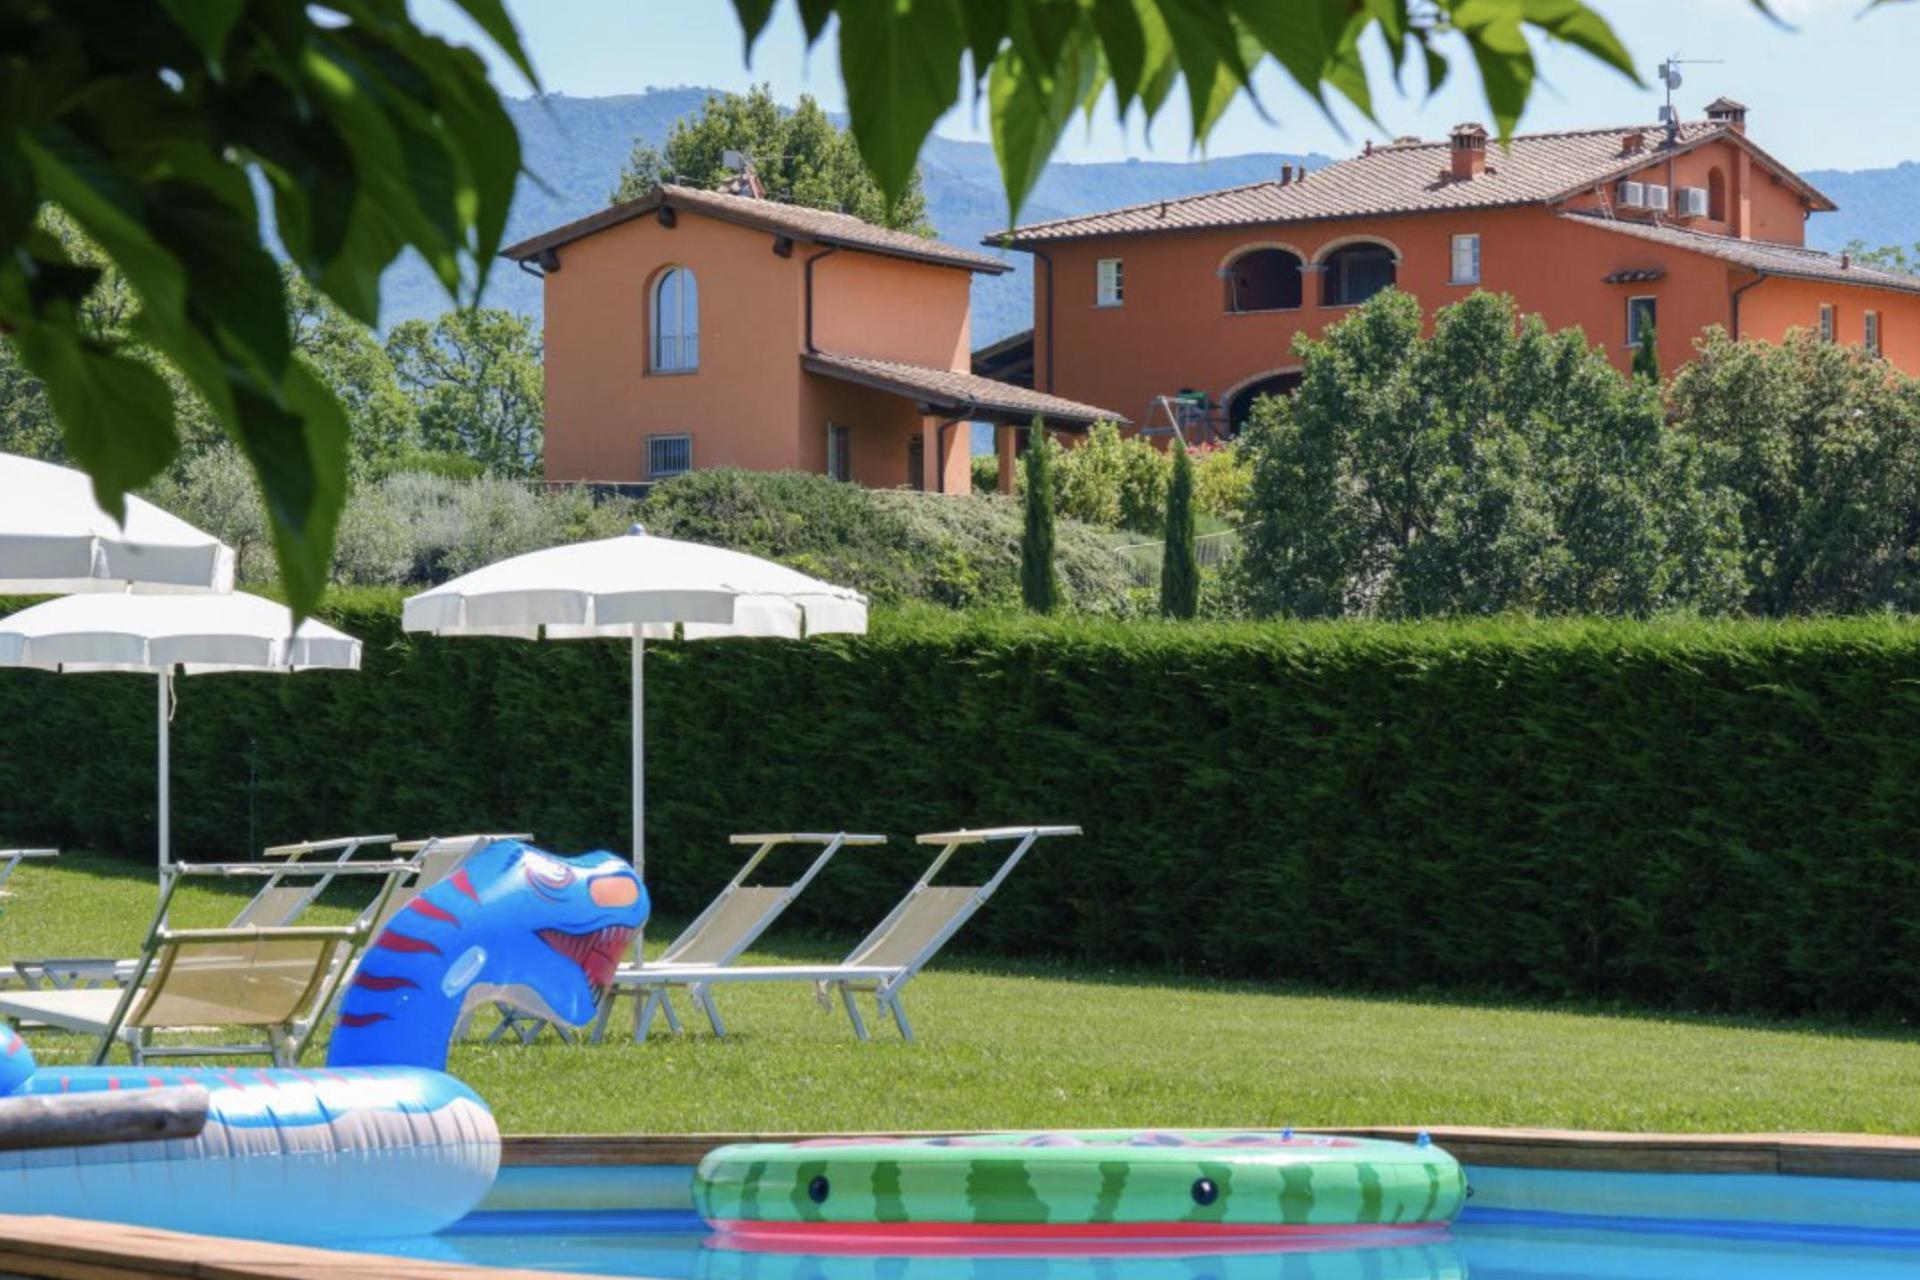 Agriturismo near Florence with design interiors